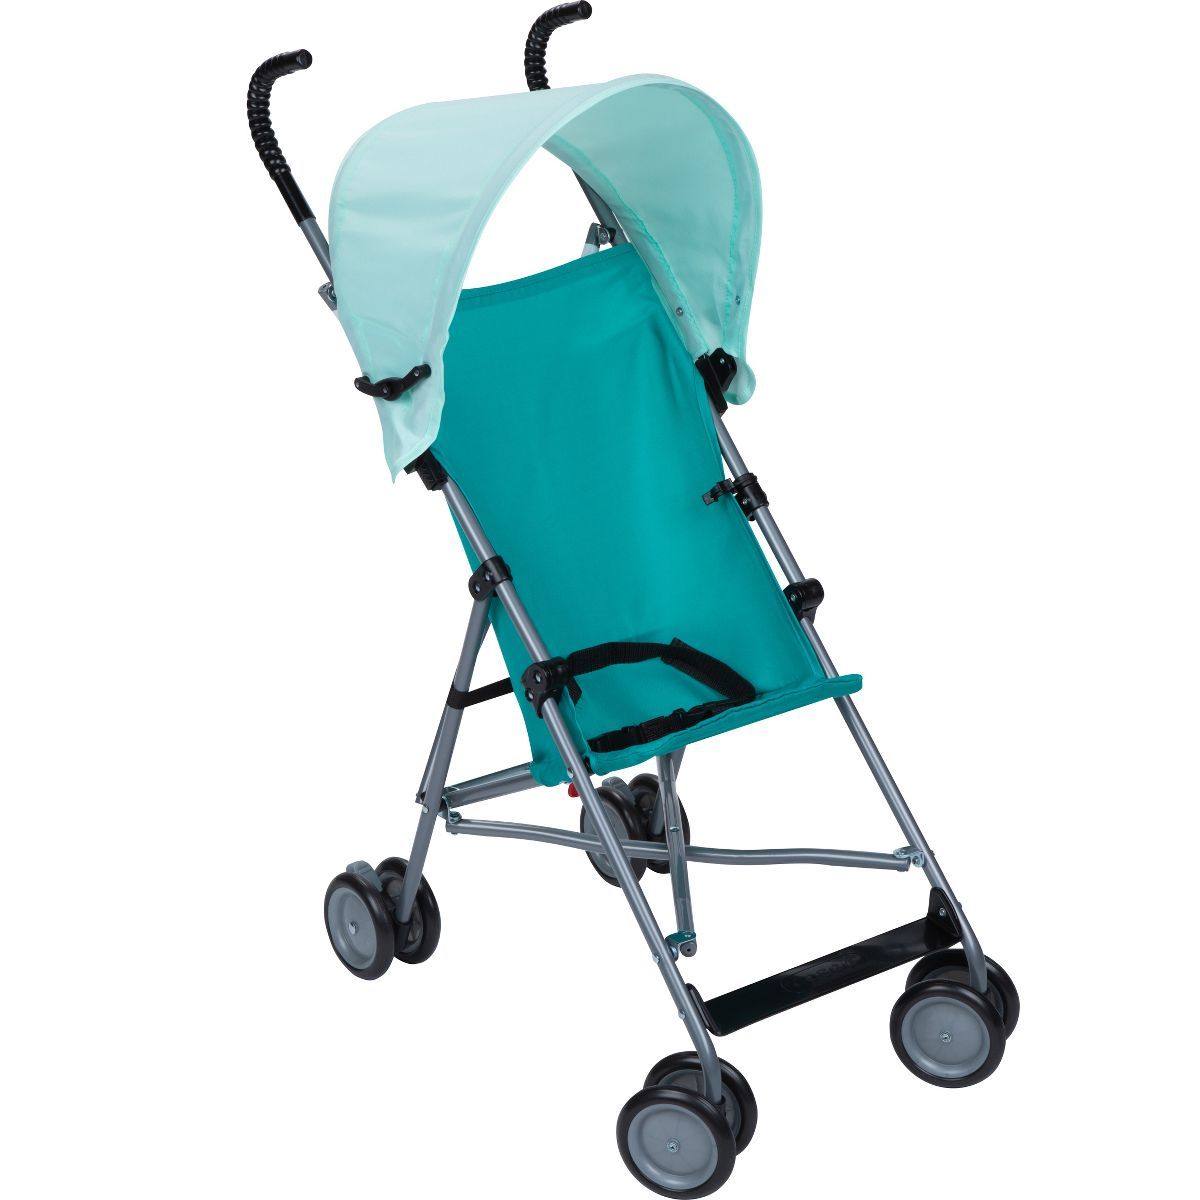 Cosco Umbrella Stroller with Canopy - Teal | Target